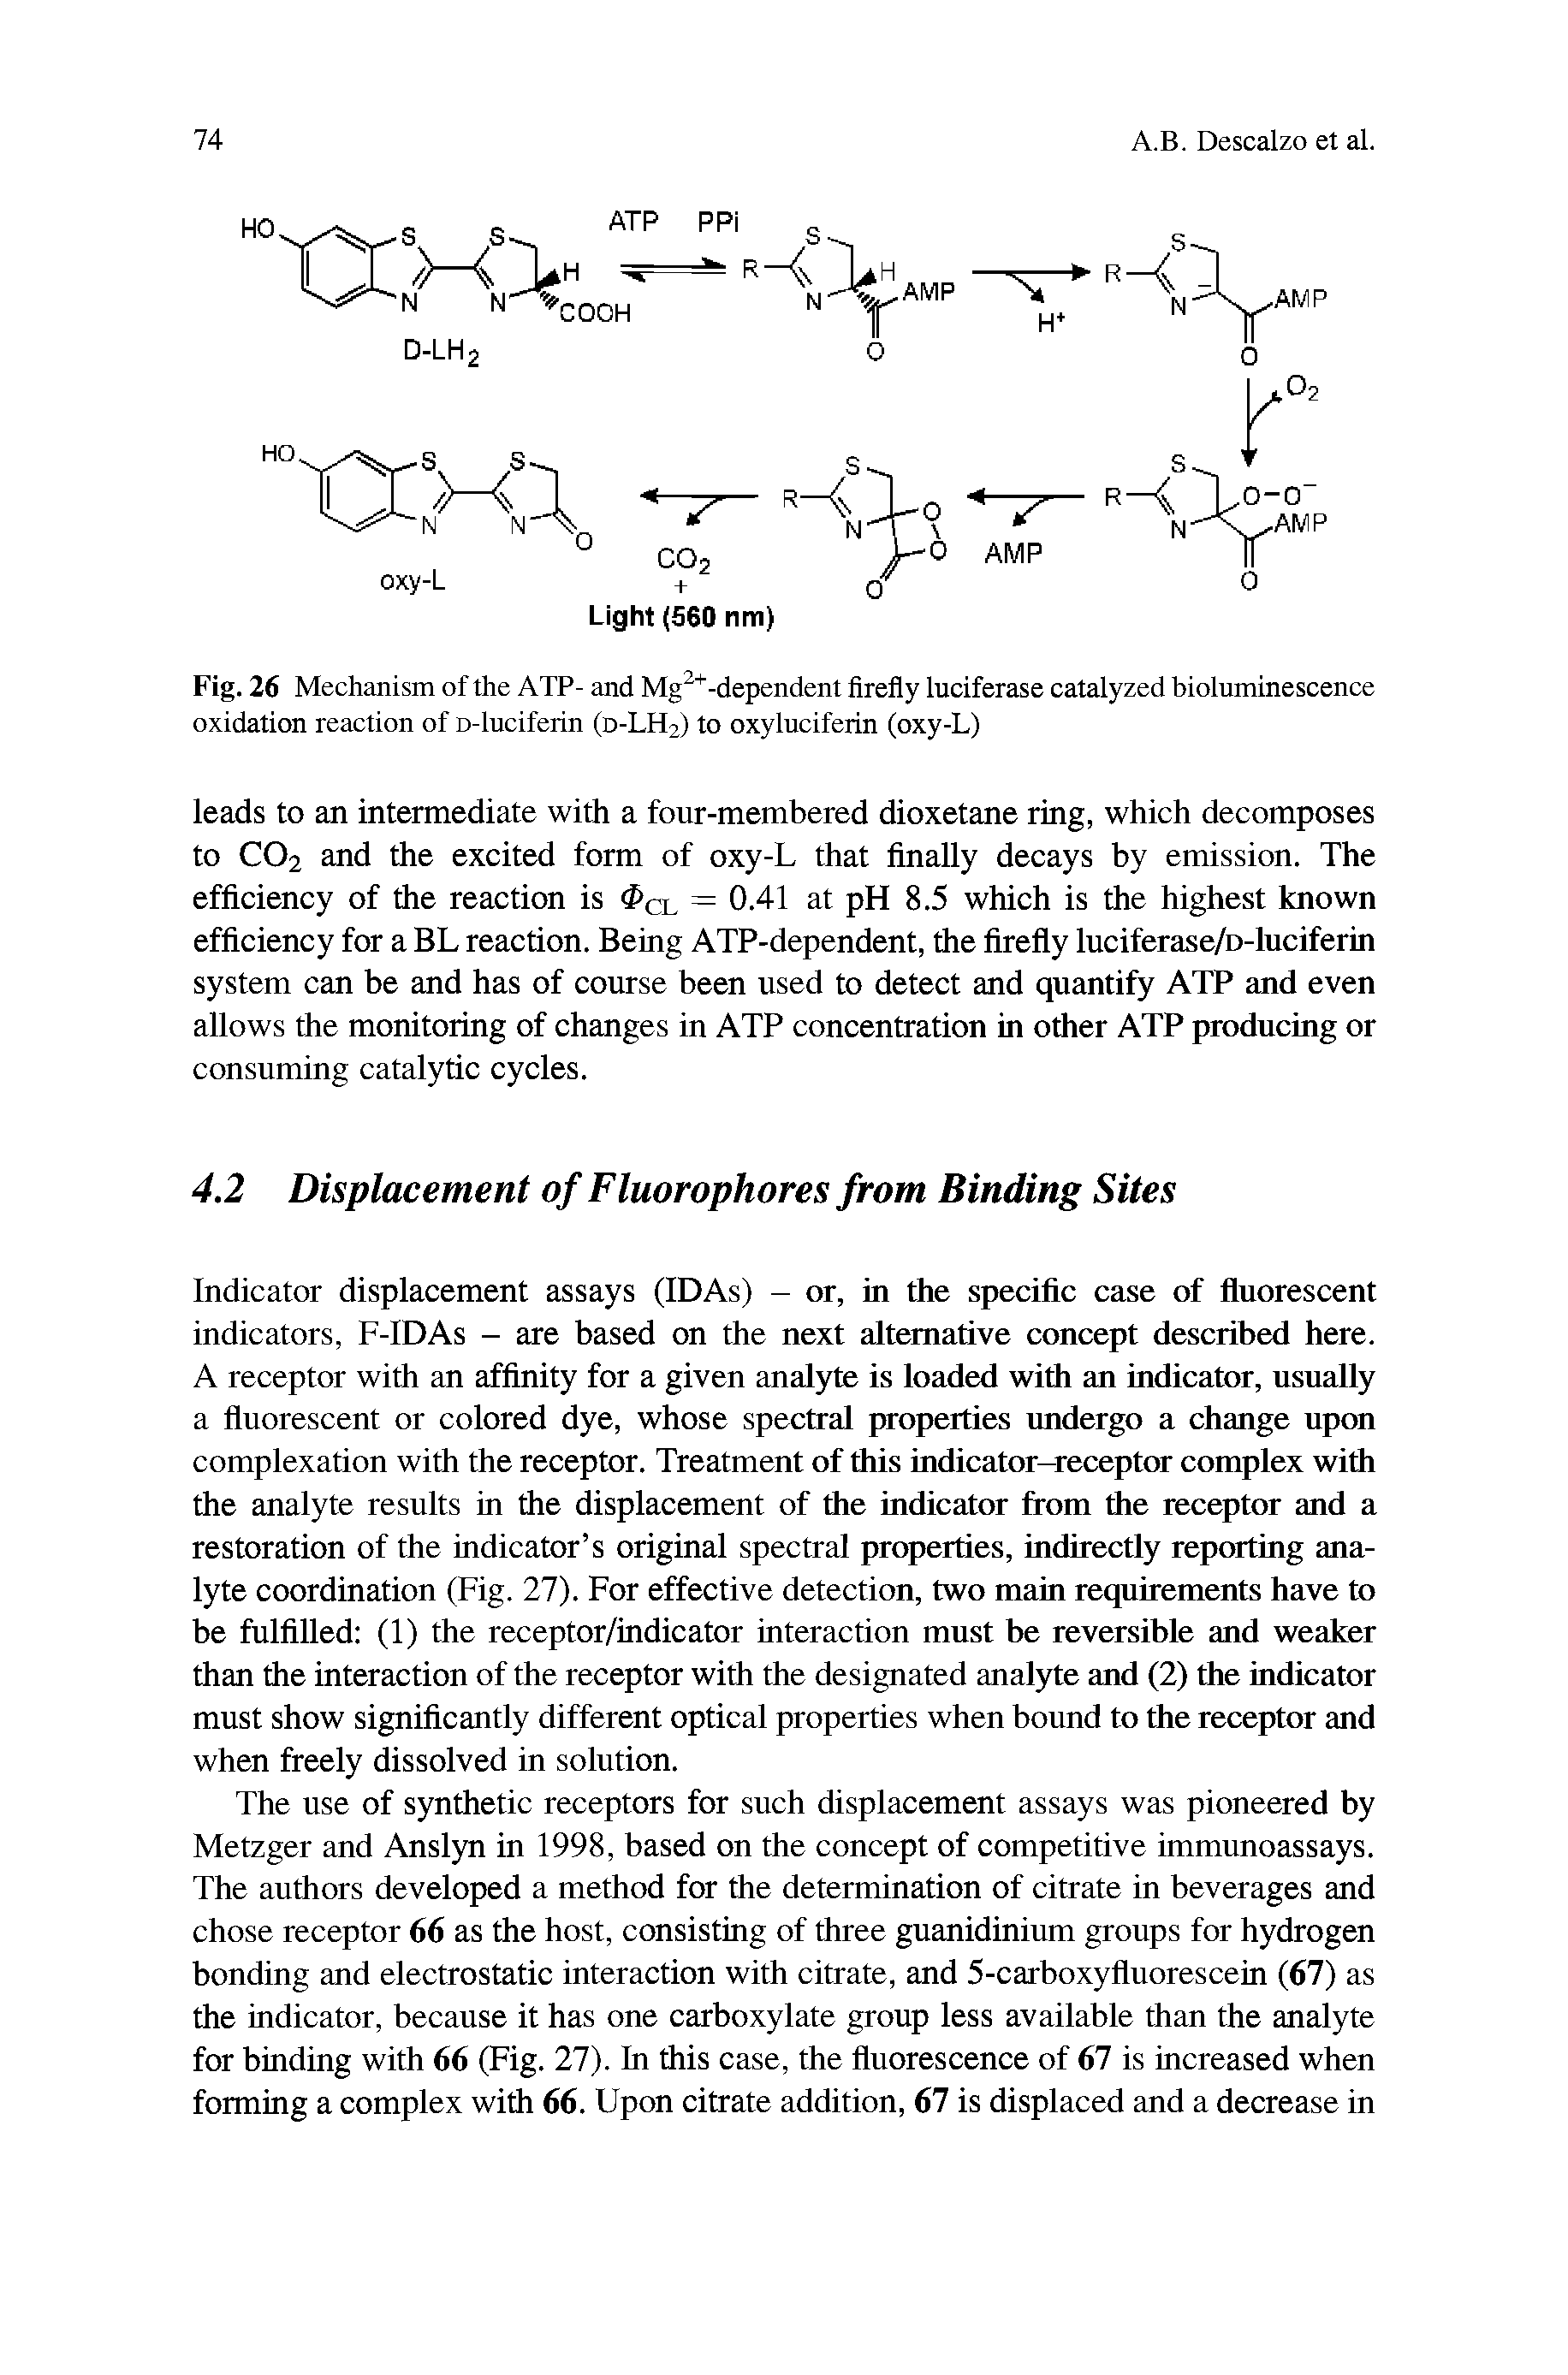 Fig. 26 Mechanism of the ATP- and Mg2+-dependent firefly luciferase catalyzed bioluminescence oxidation reaction of D-luciferin (d-LH2) to oxyluciferin (oxy-L)...